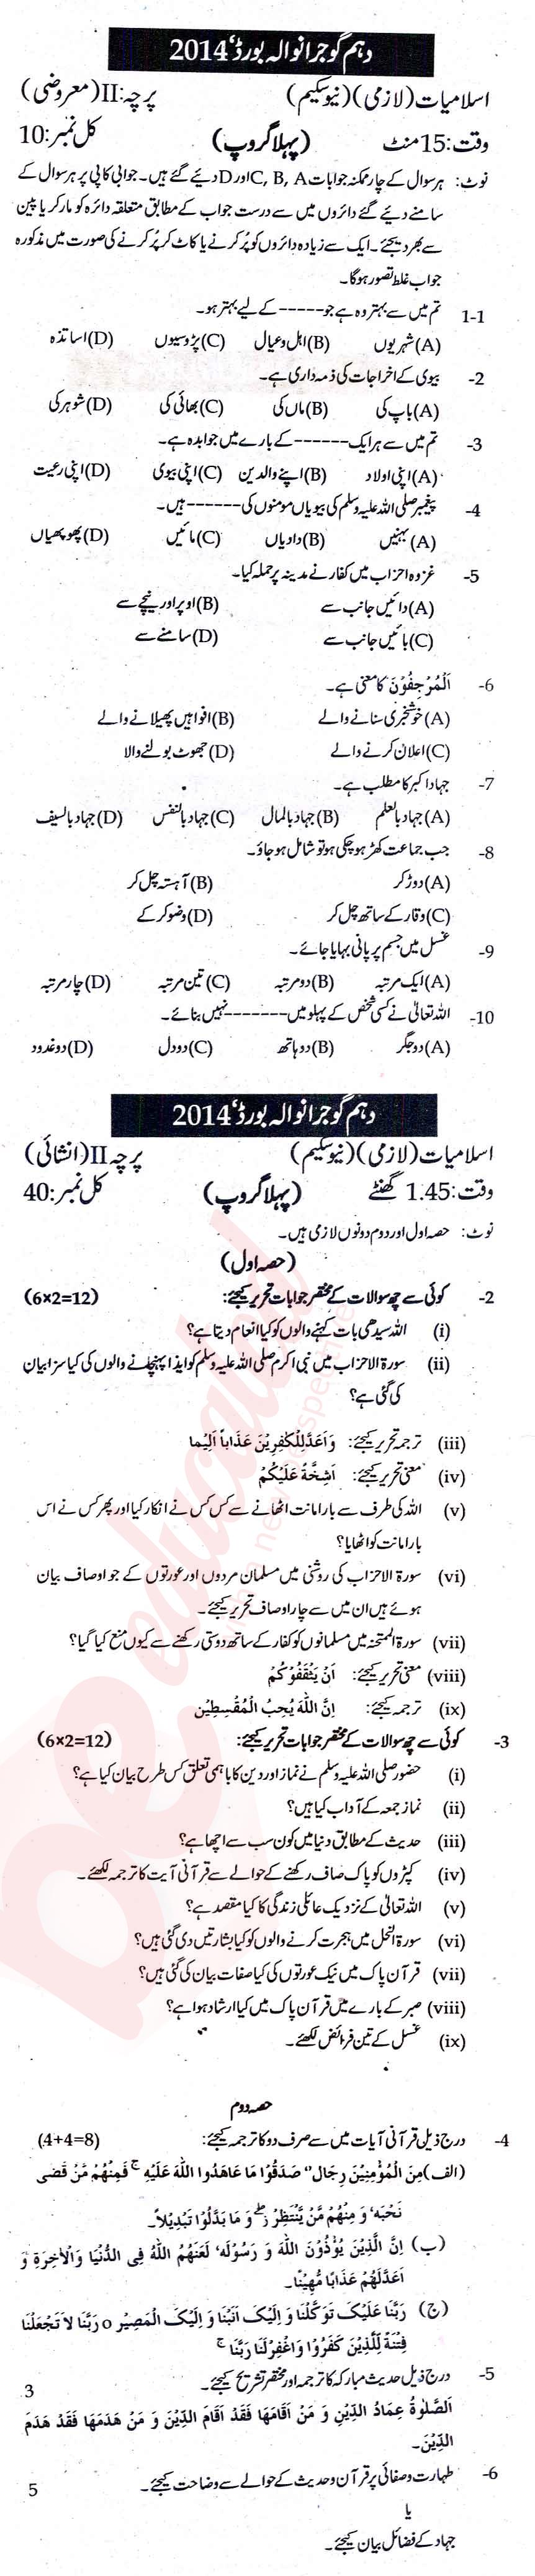 Islamiat (Compulsory) 10th class Past Paper Group 1 BISE Gujranwala 2014